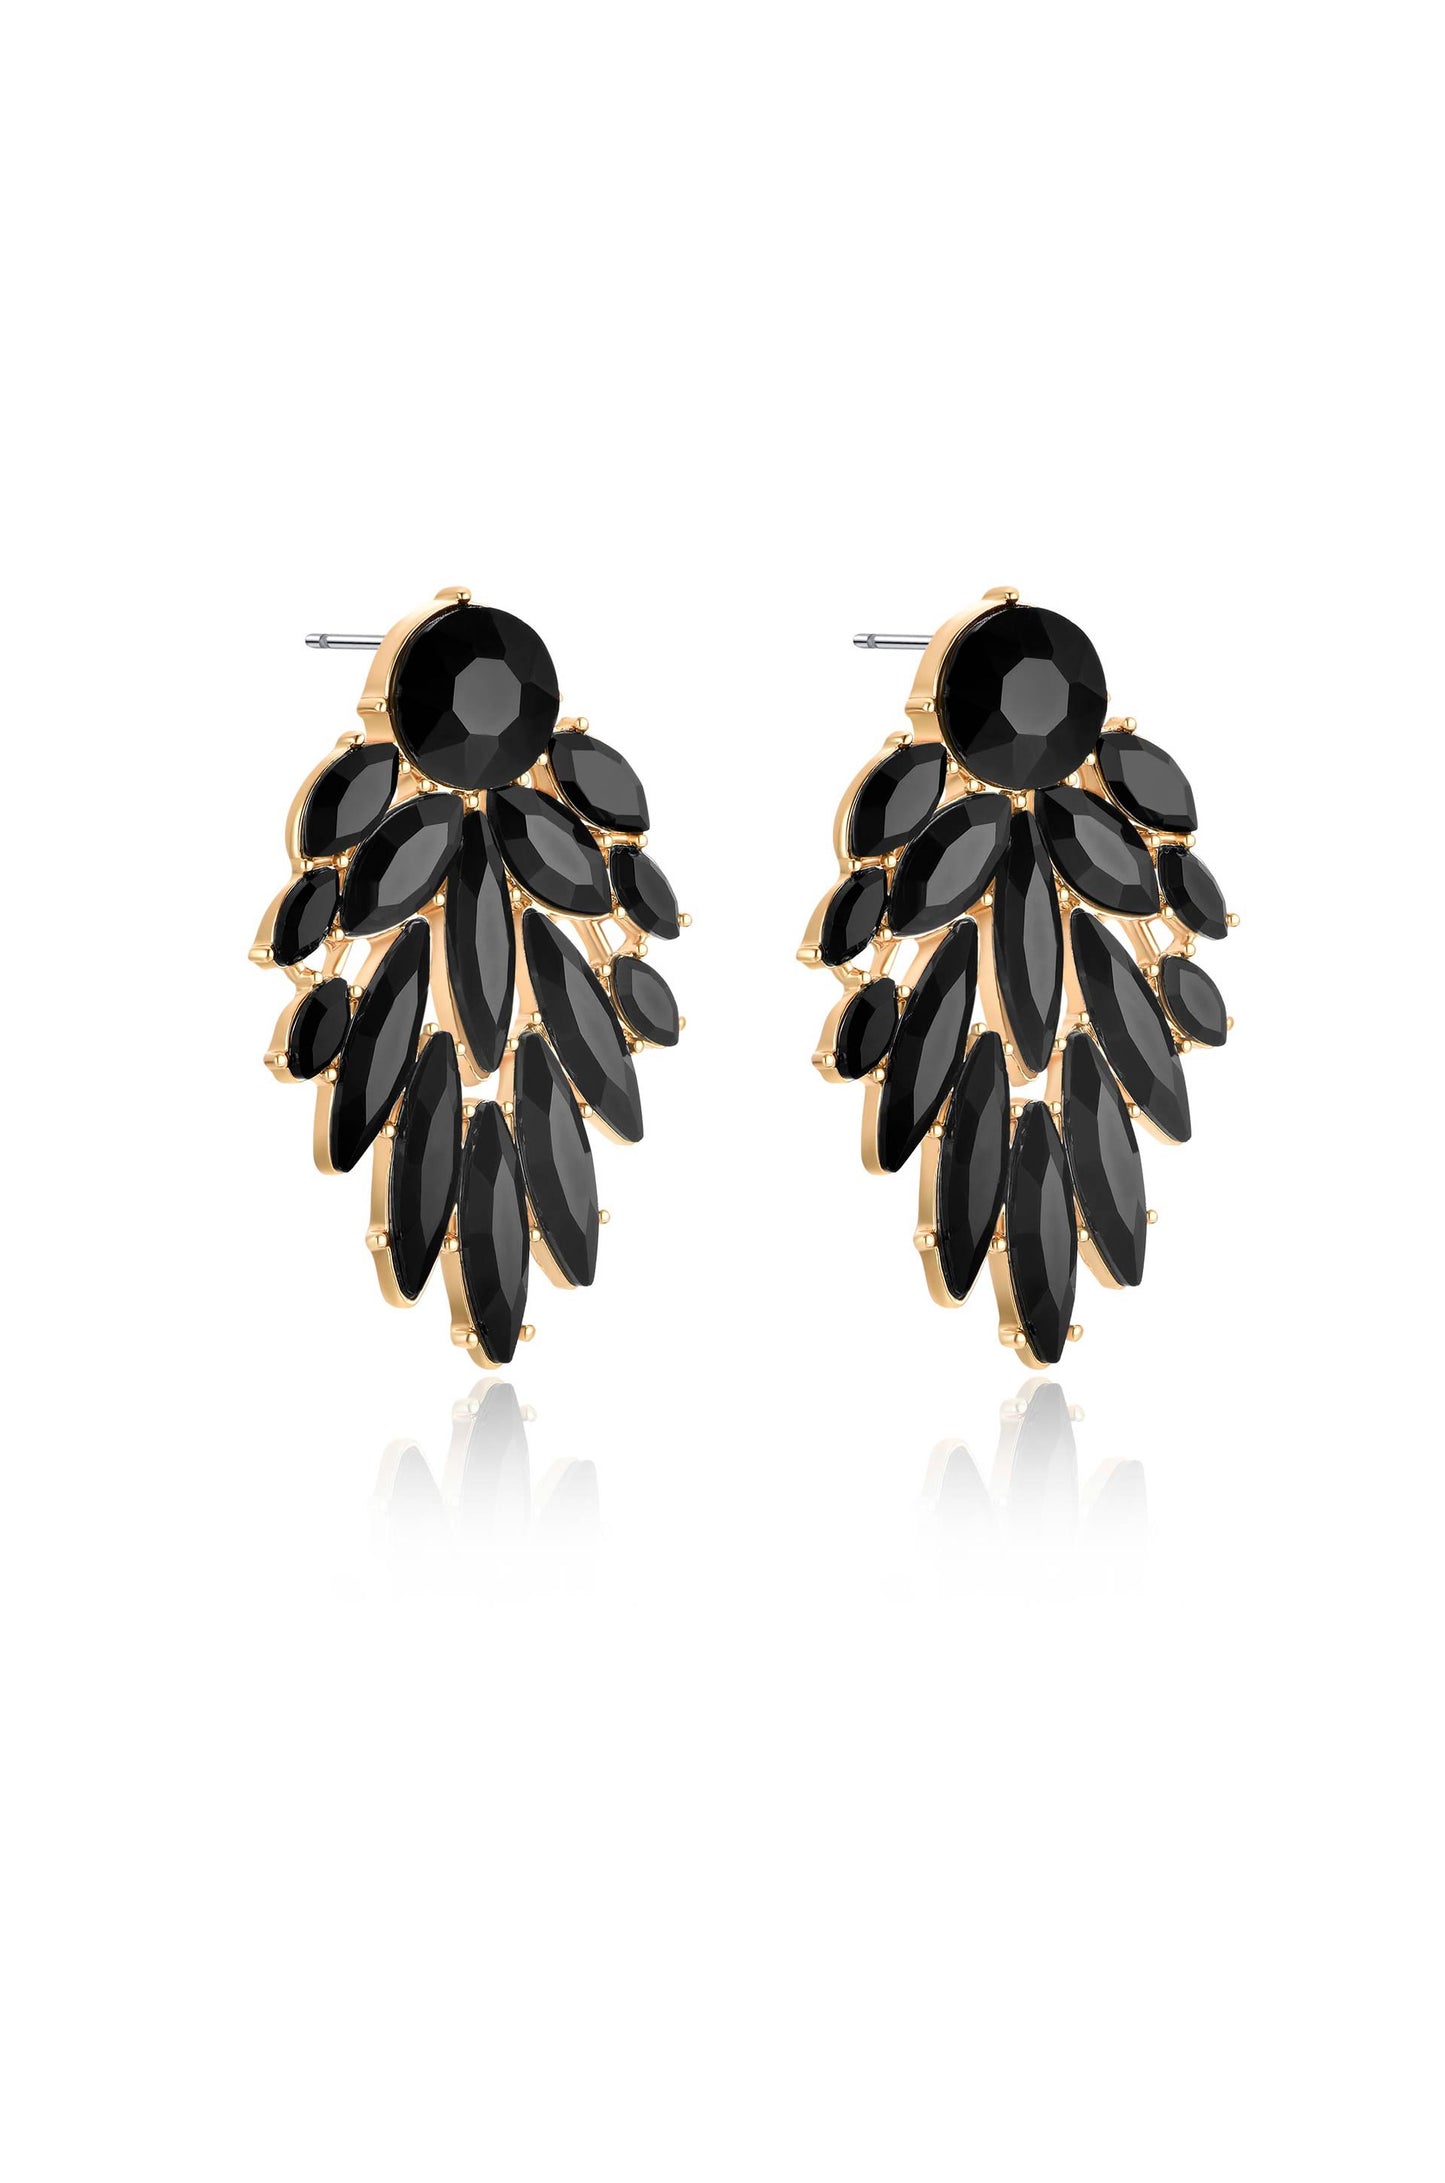 Cry Me A River 18k Gold Plated Earrings in black on white side view